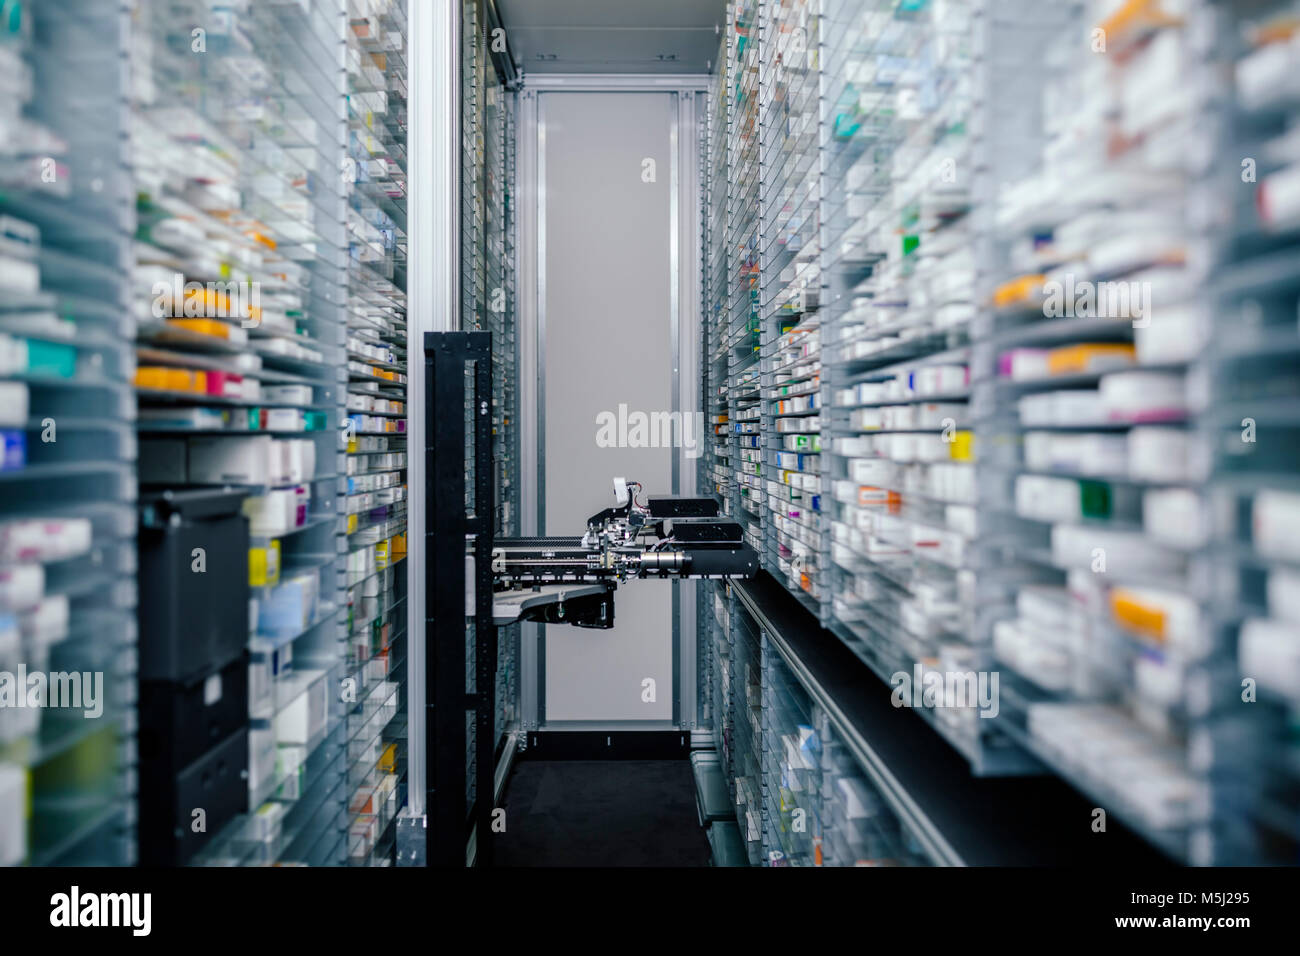 Medicine in shelves in commissioning machine in pharmacy Stock Photo